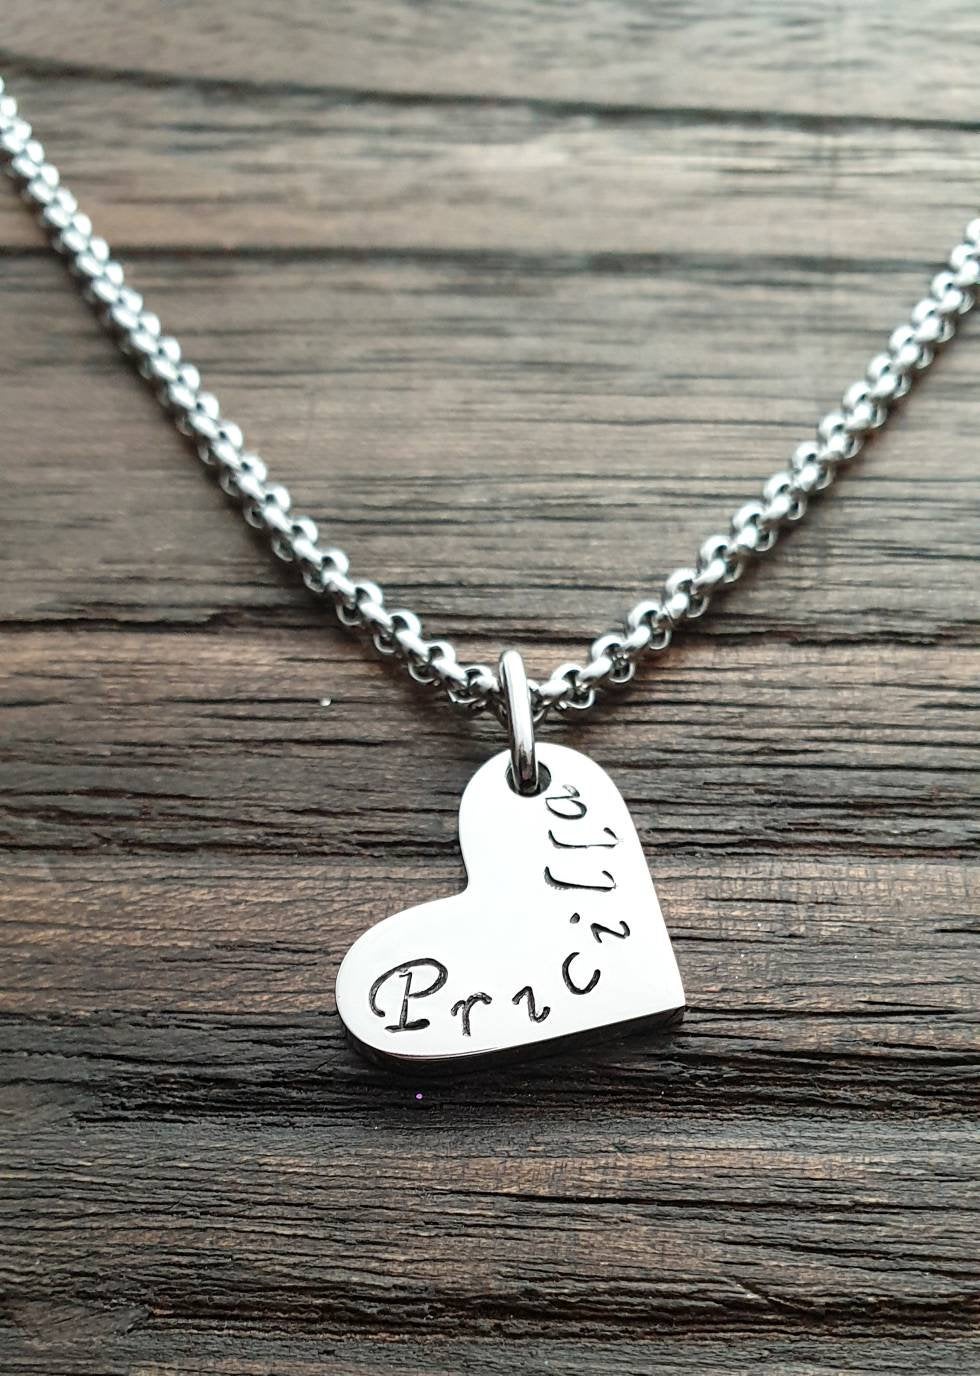 Personalised Heart Necklace, Minimalist Necklace, Hand Stamped Name Necklace add Name, Date or Initials